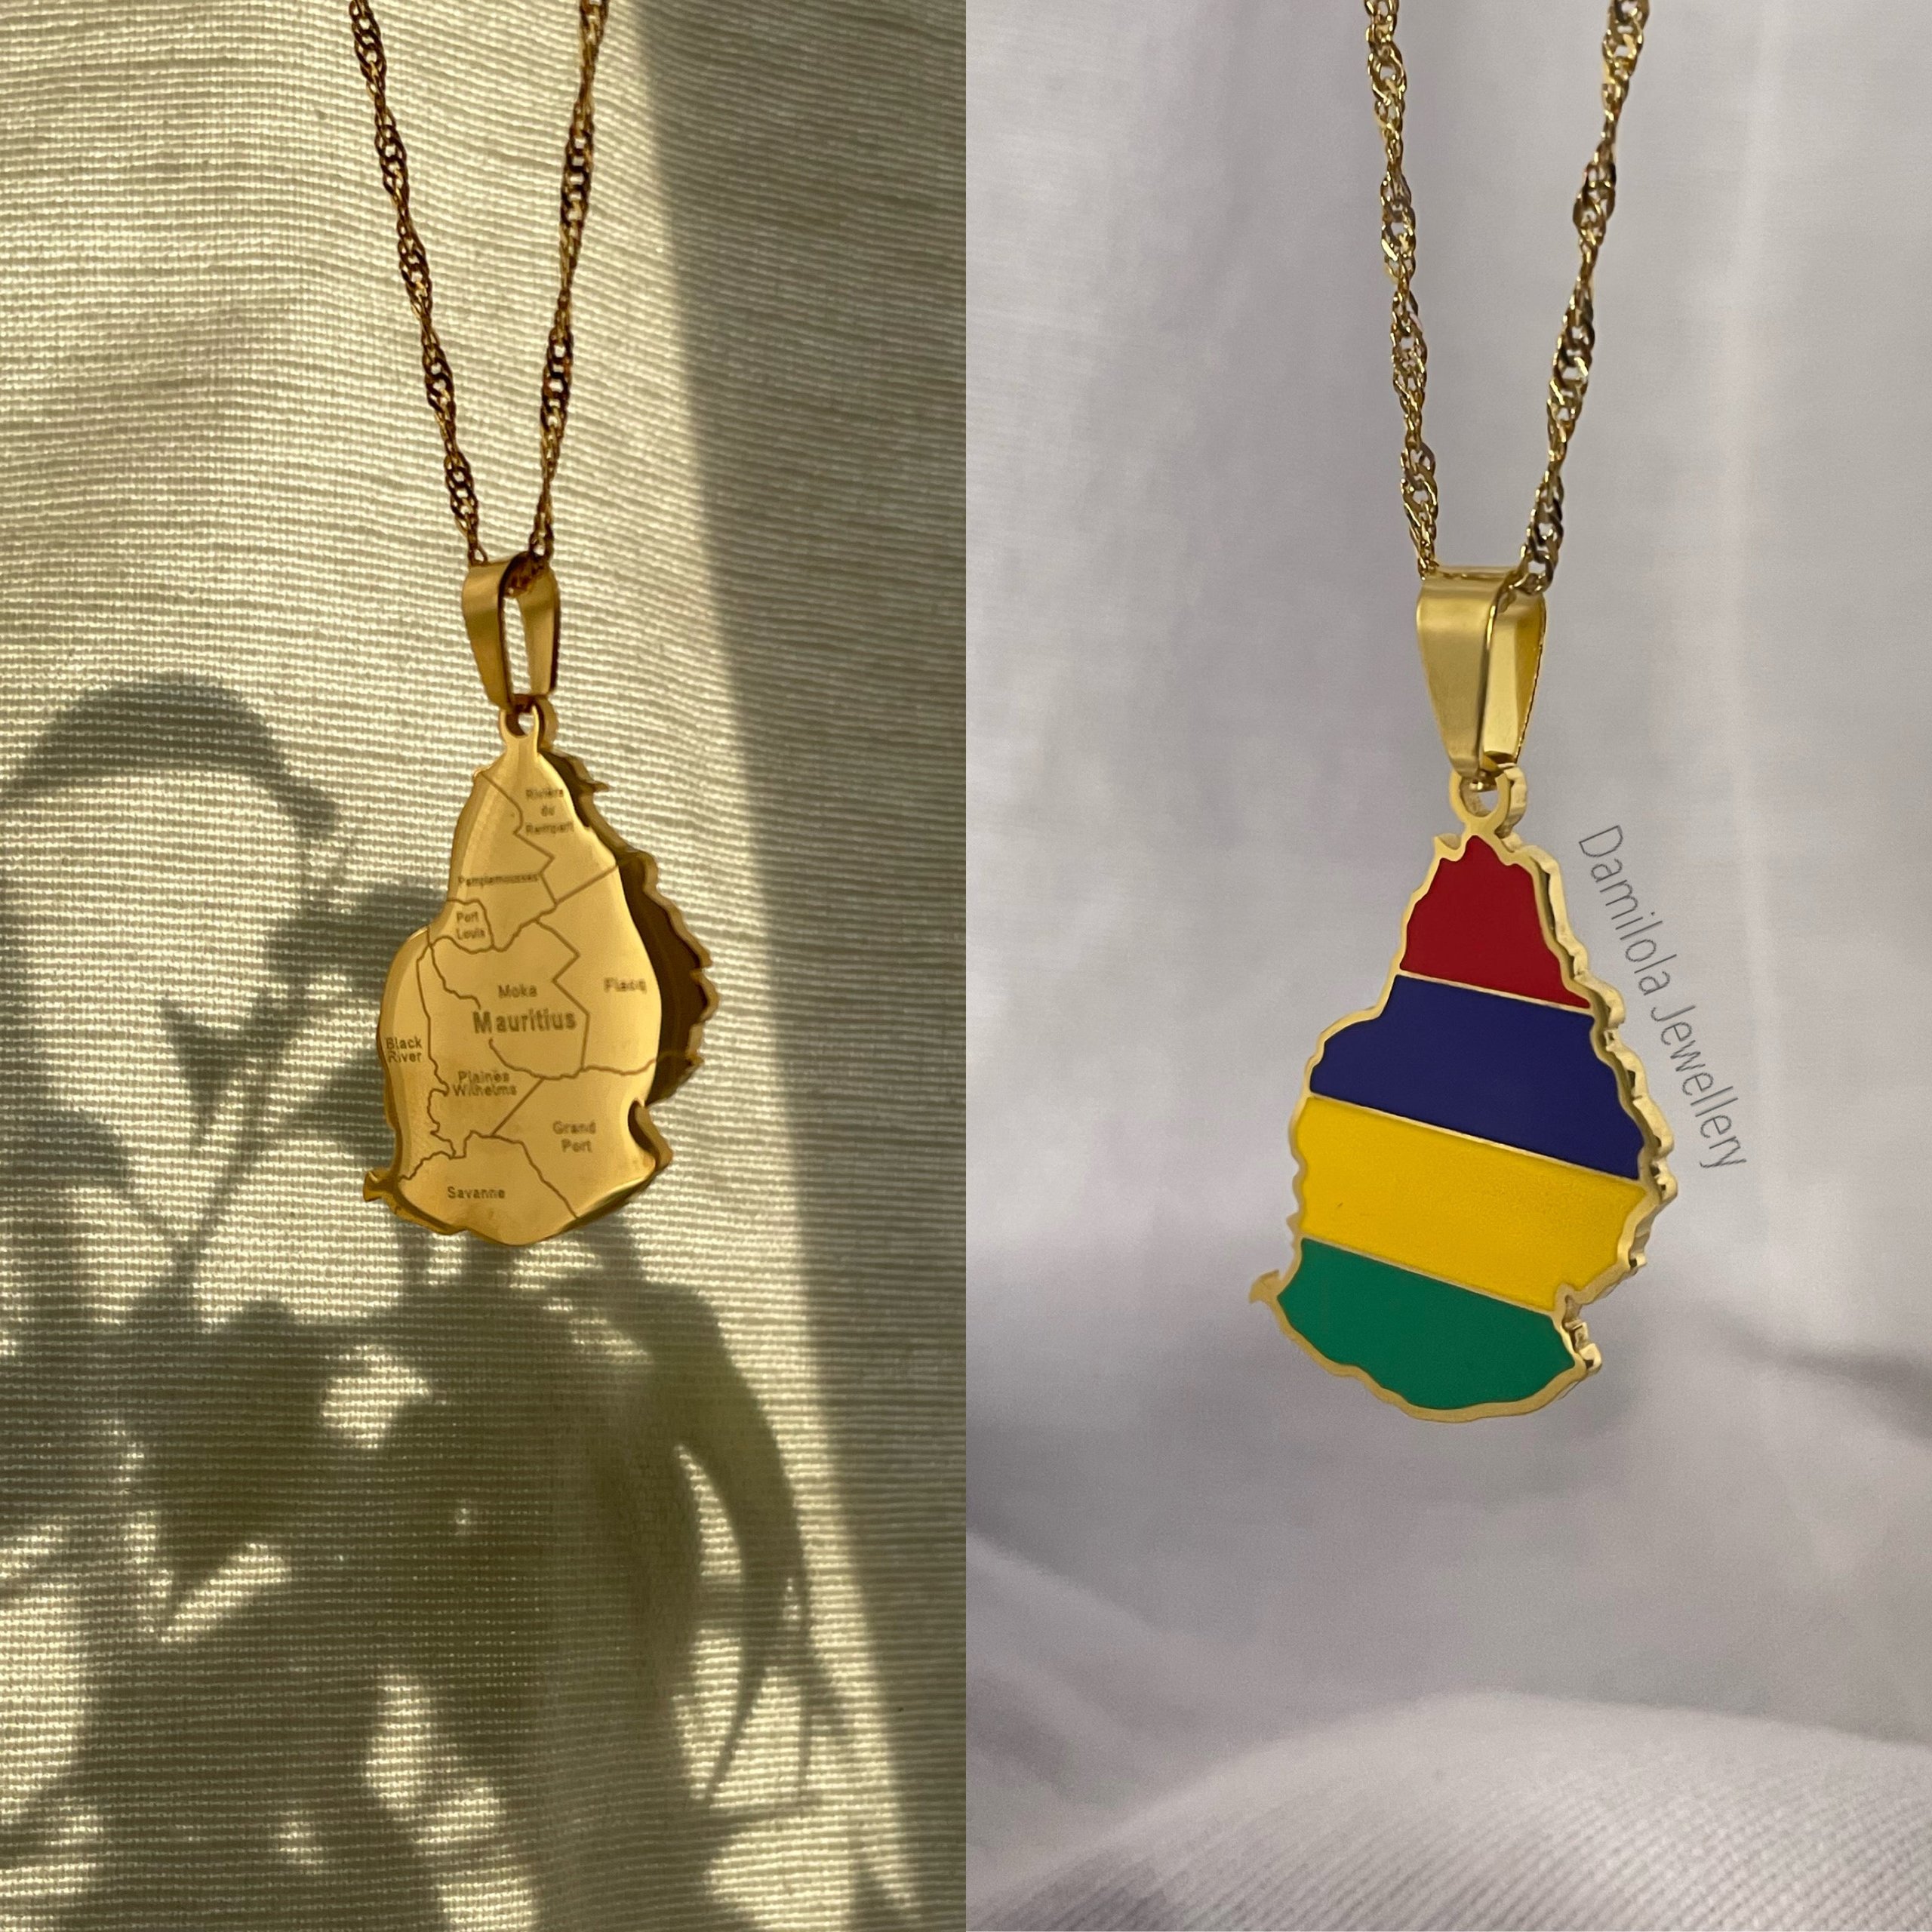 Mauritius Flag Necklace – 2 Styles